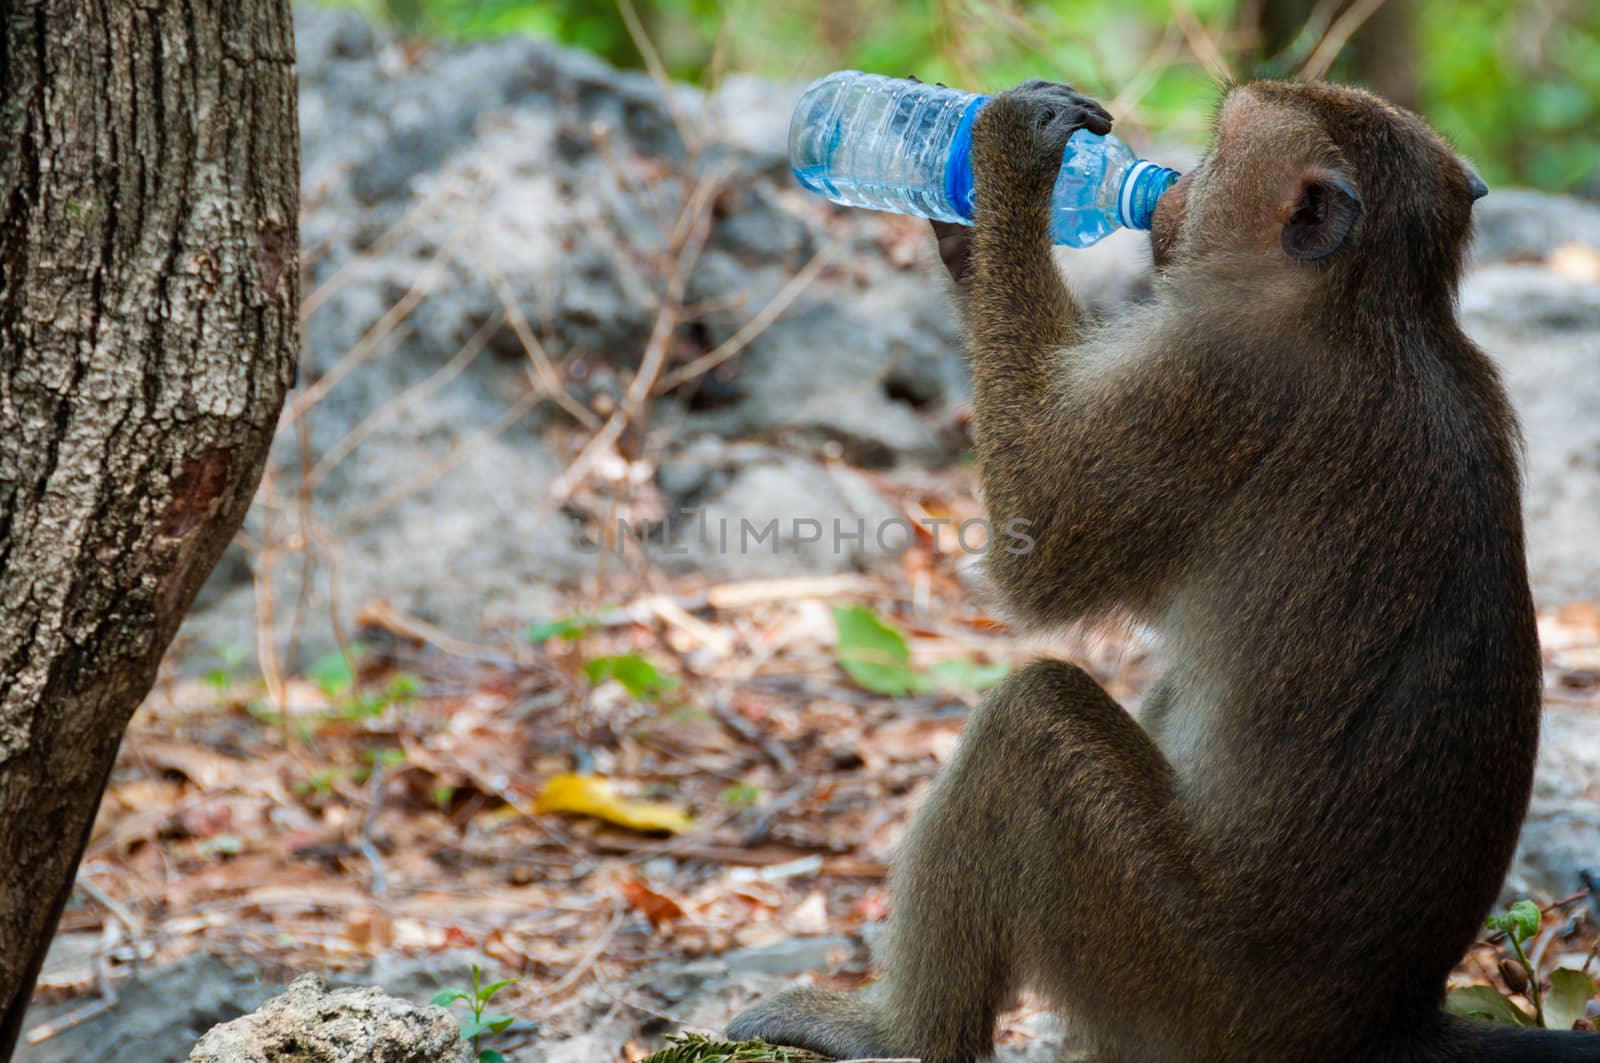 Monkey Rhesus Macaque drinking from a water bottle by attiarndt